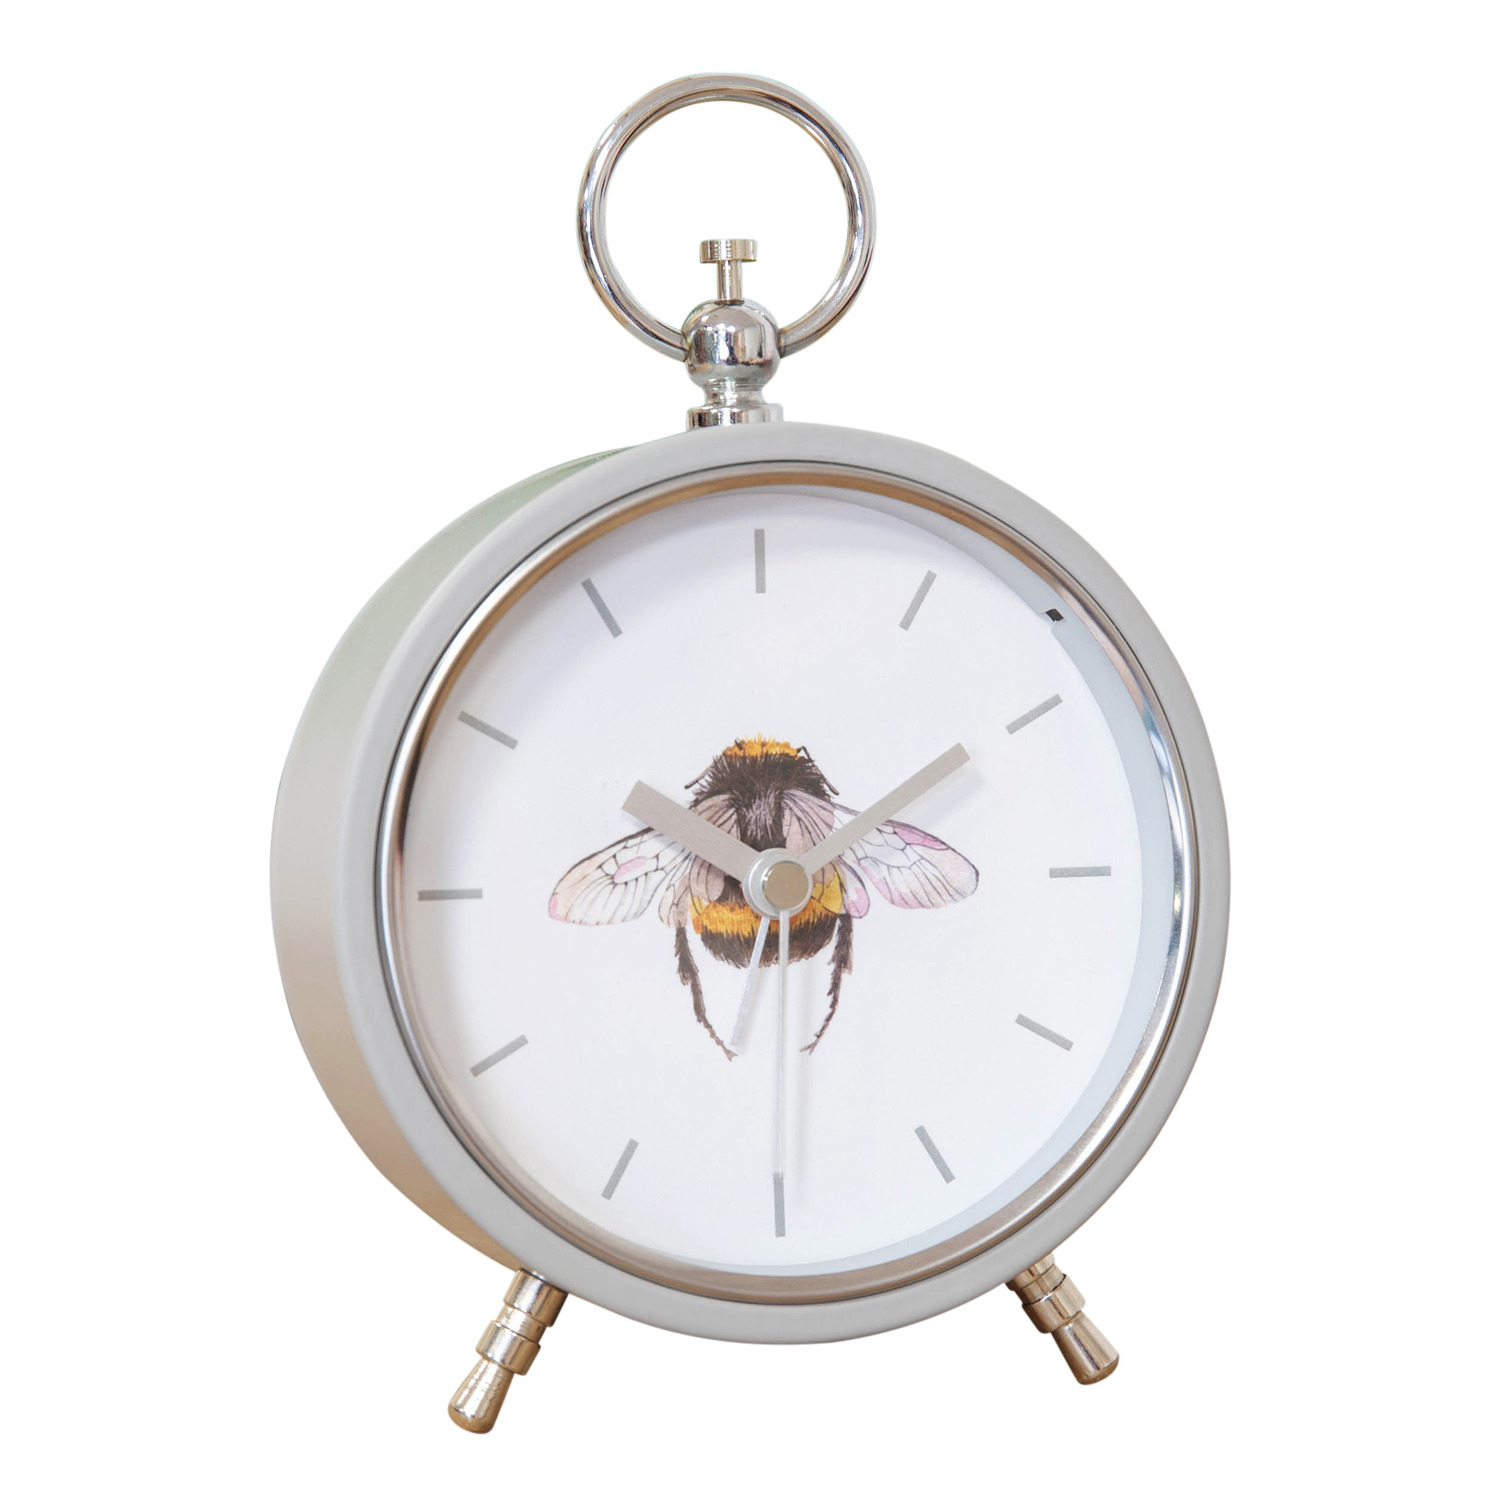 Alarm Clock Bumble Bee design Grey Metal with glass front and Grey Numbers and detail 